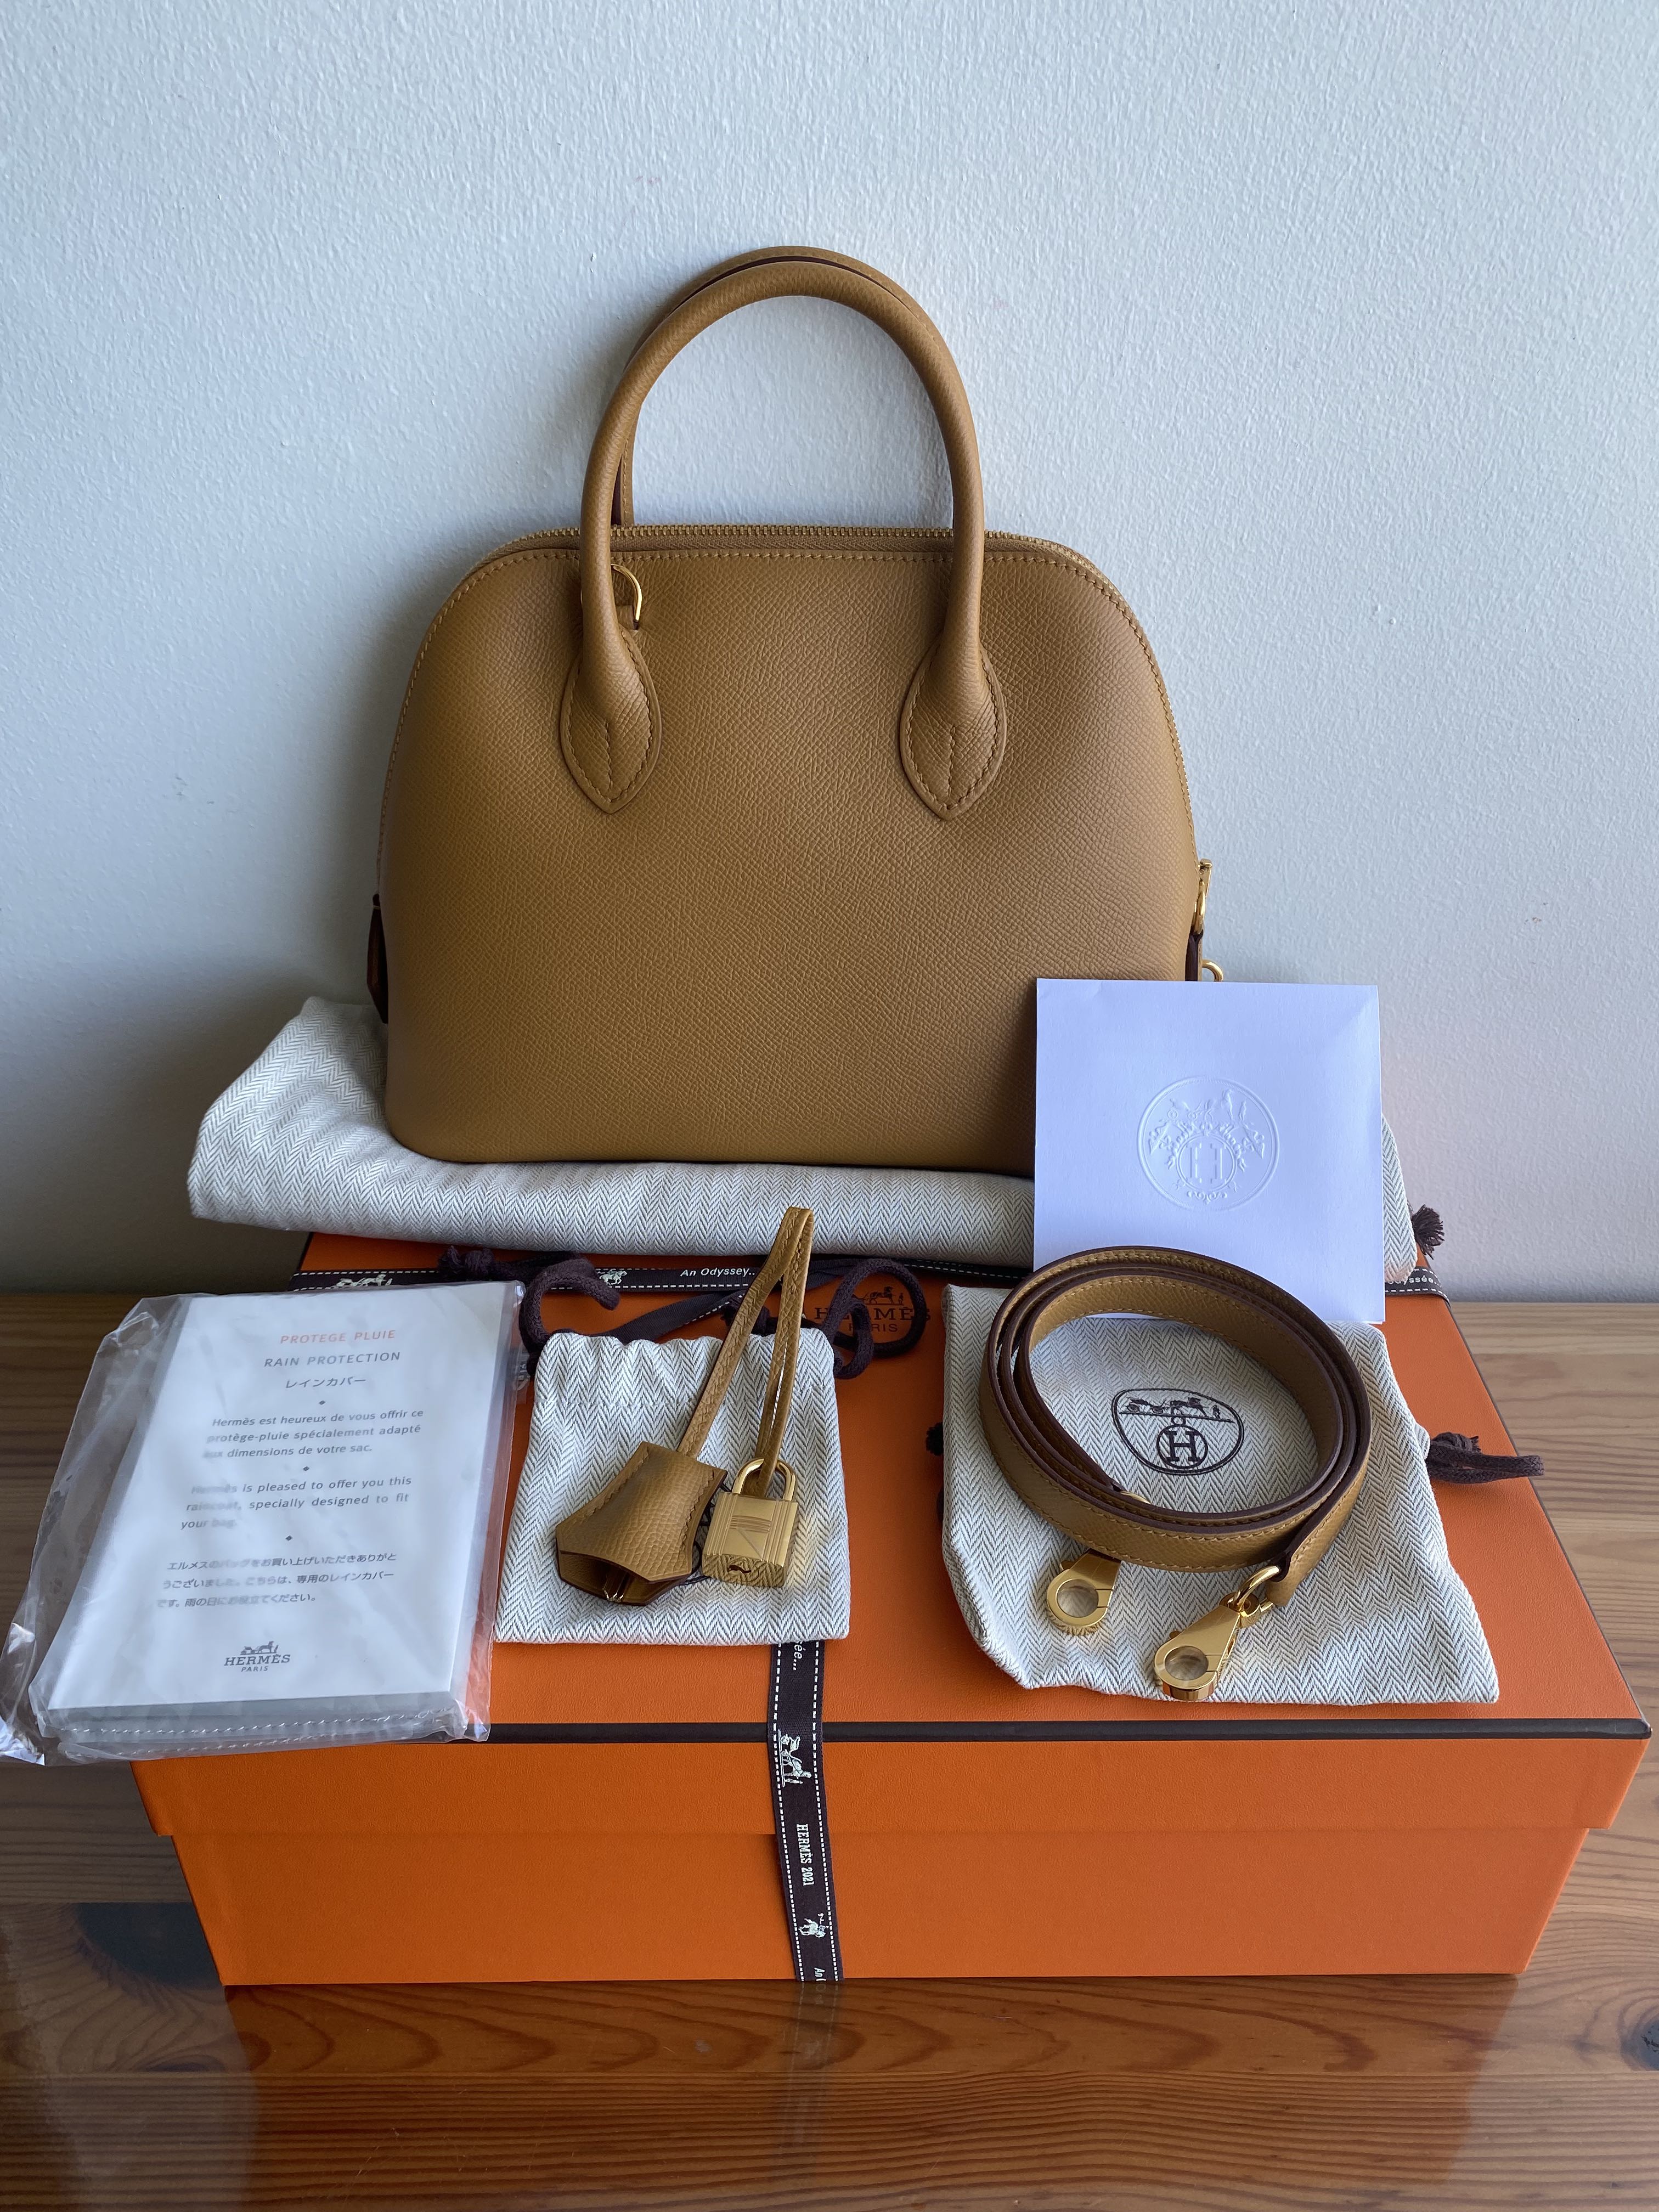 SOLD* BNIB 25 Hermes Bolide 1923 (new size for 2021), Luxury, Bags